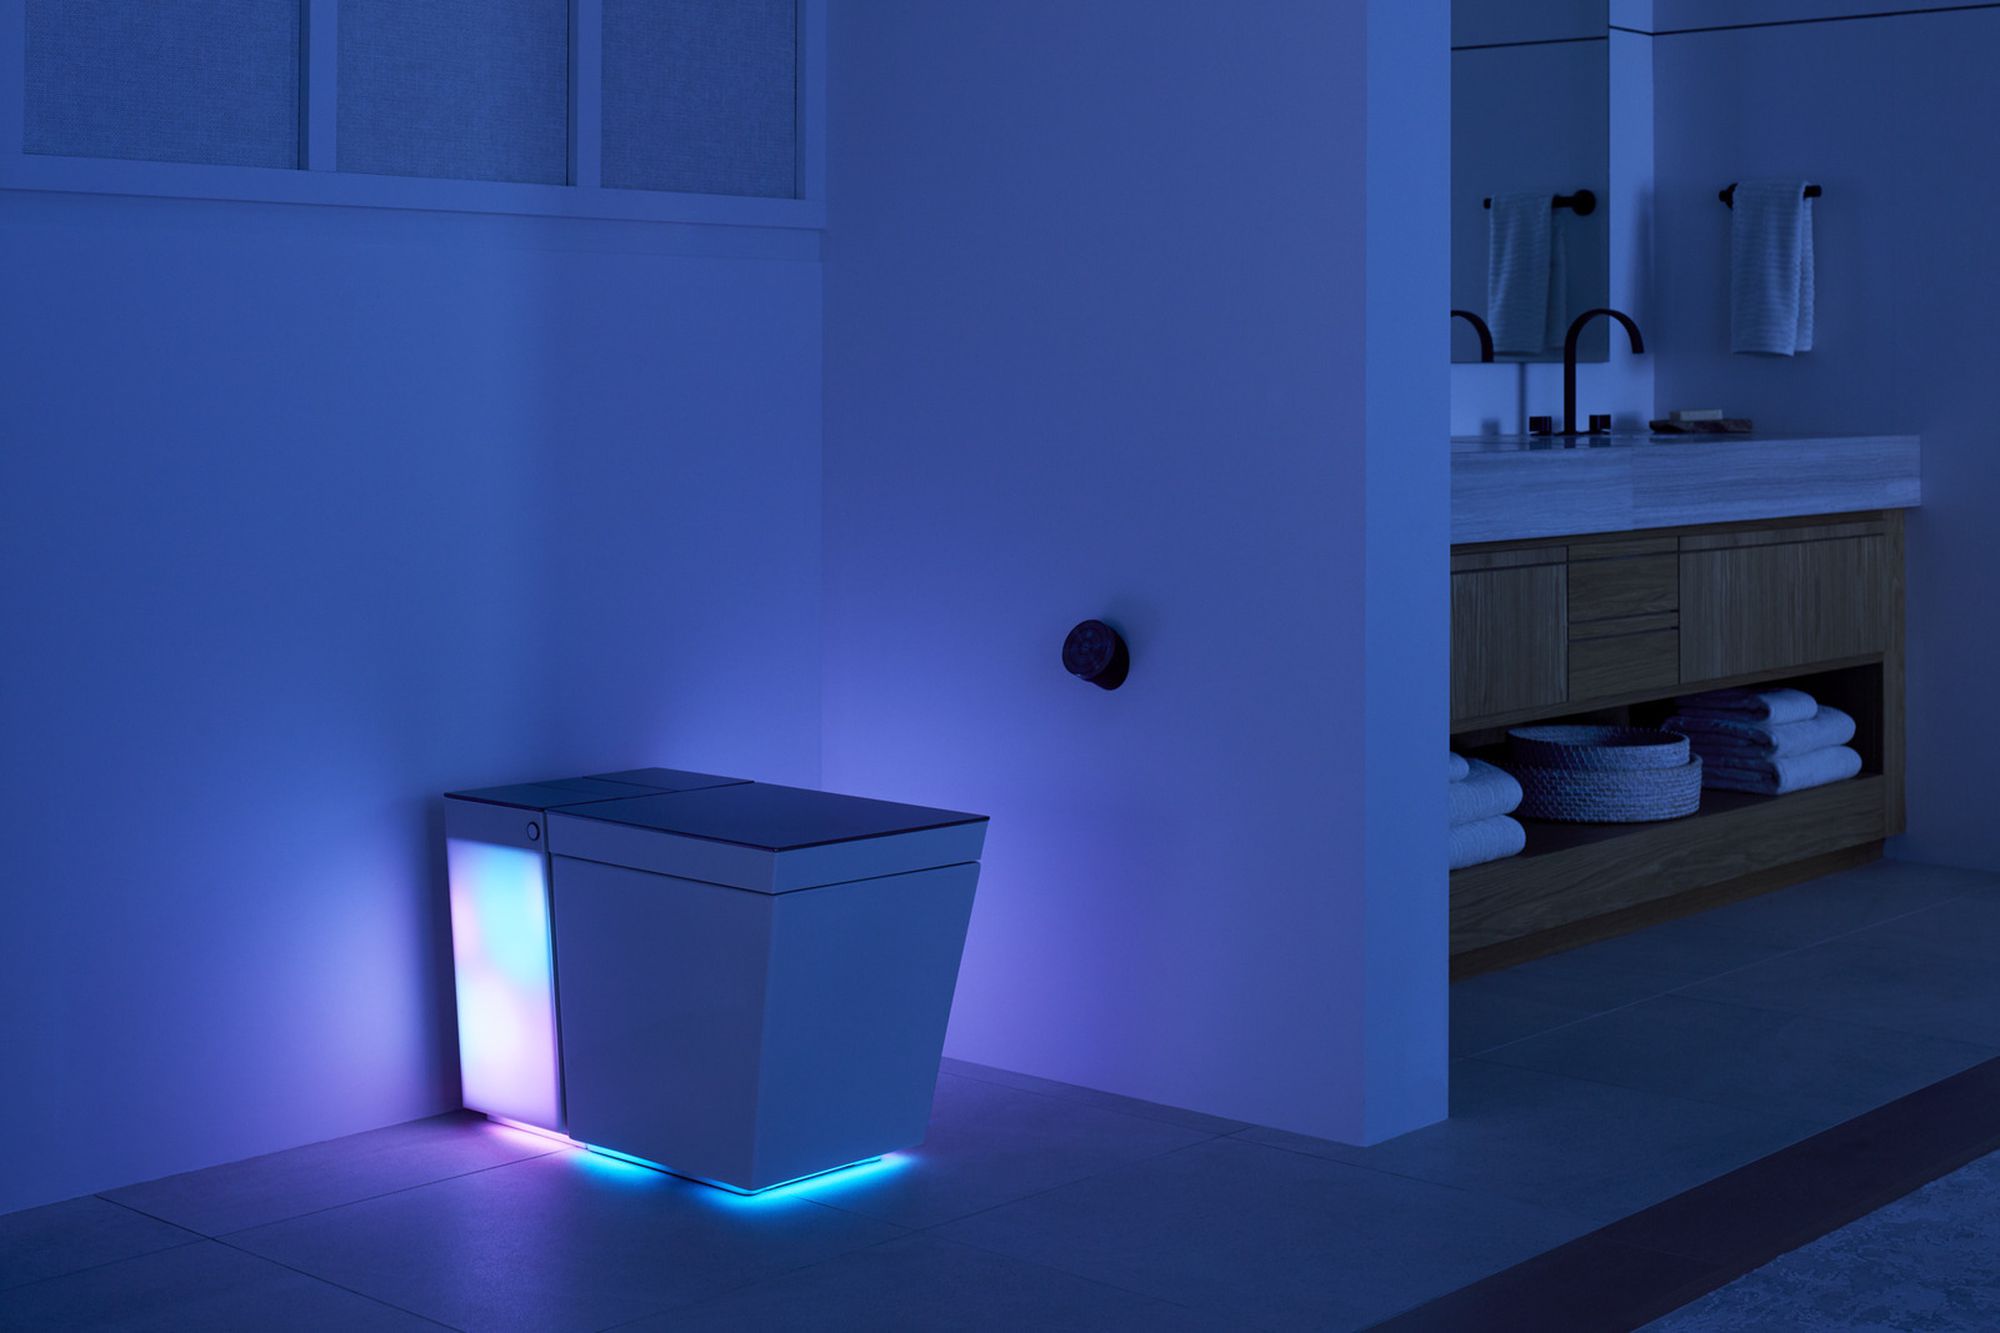 Backlight, voice assistant and built-in air freshener for ,500: this is the new “smart” toilet